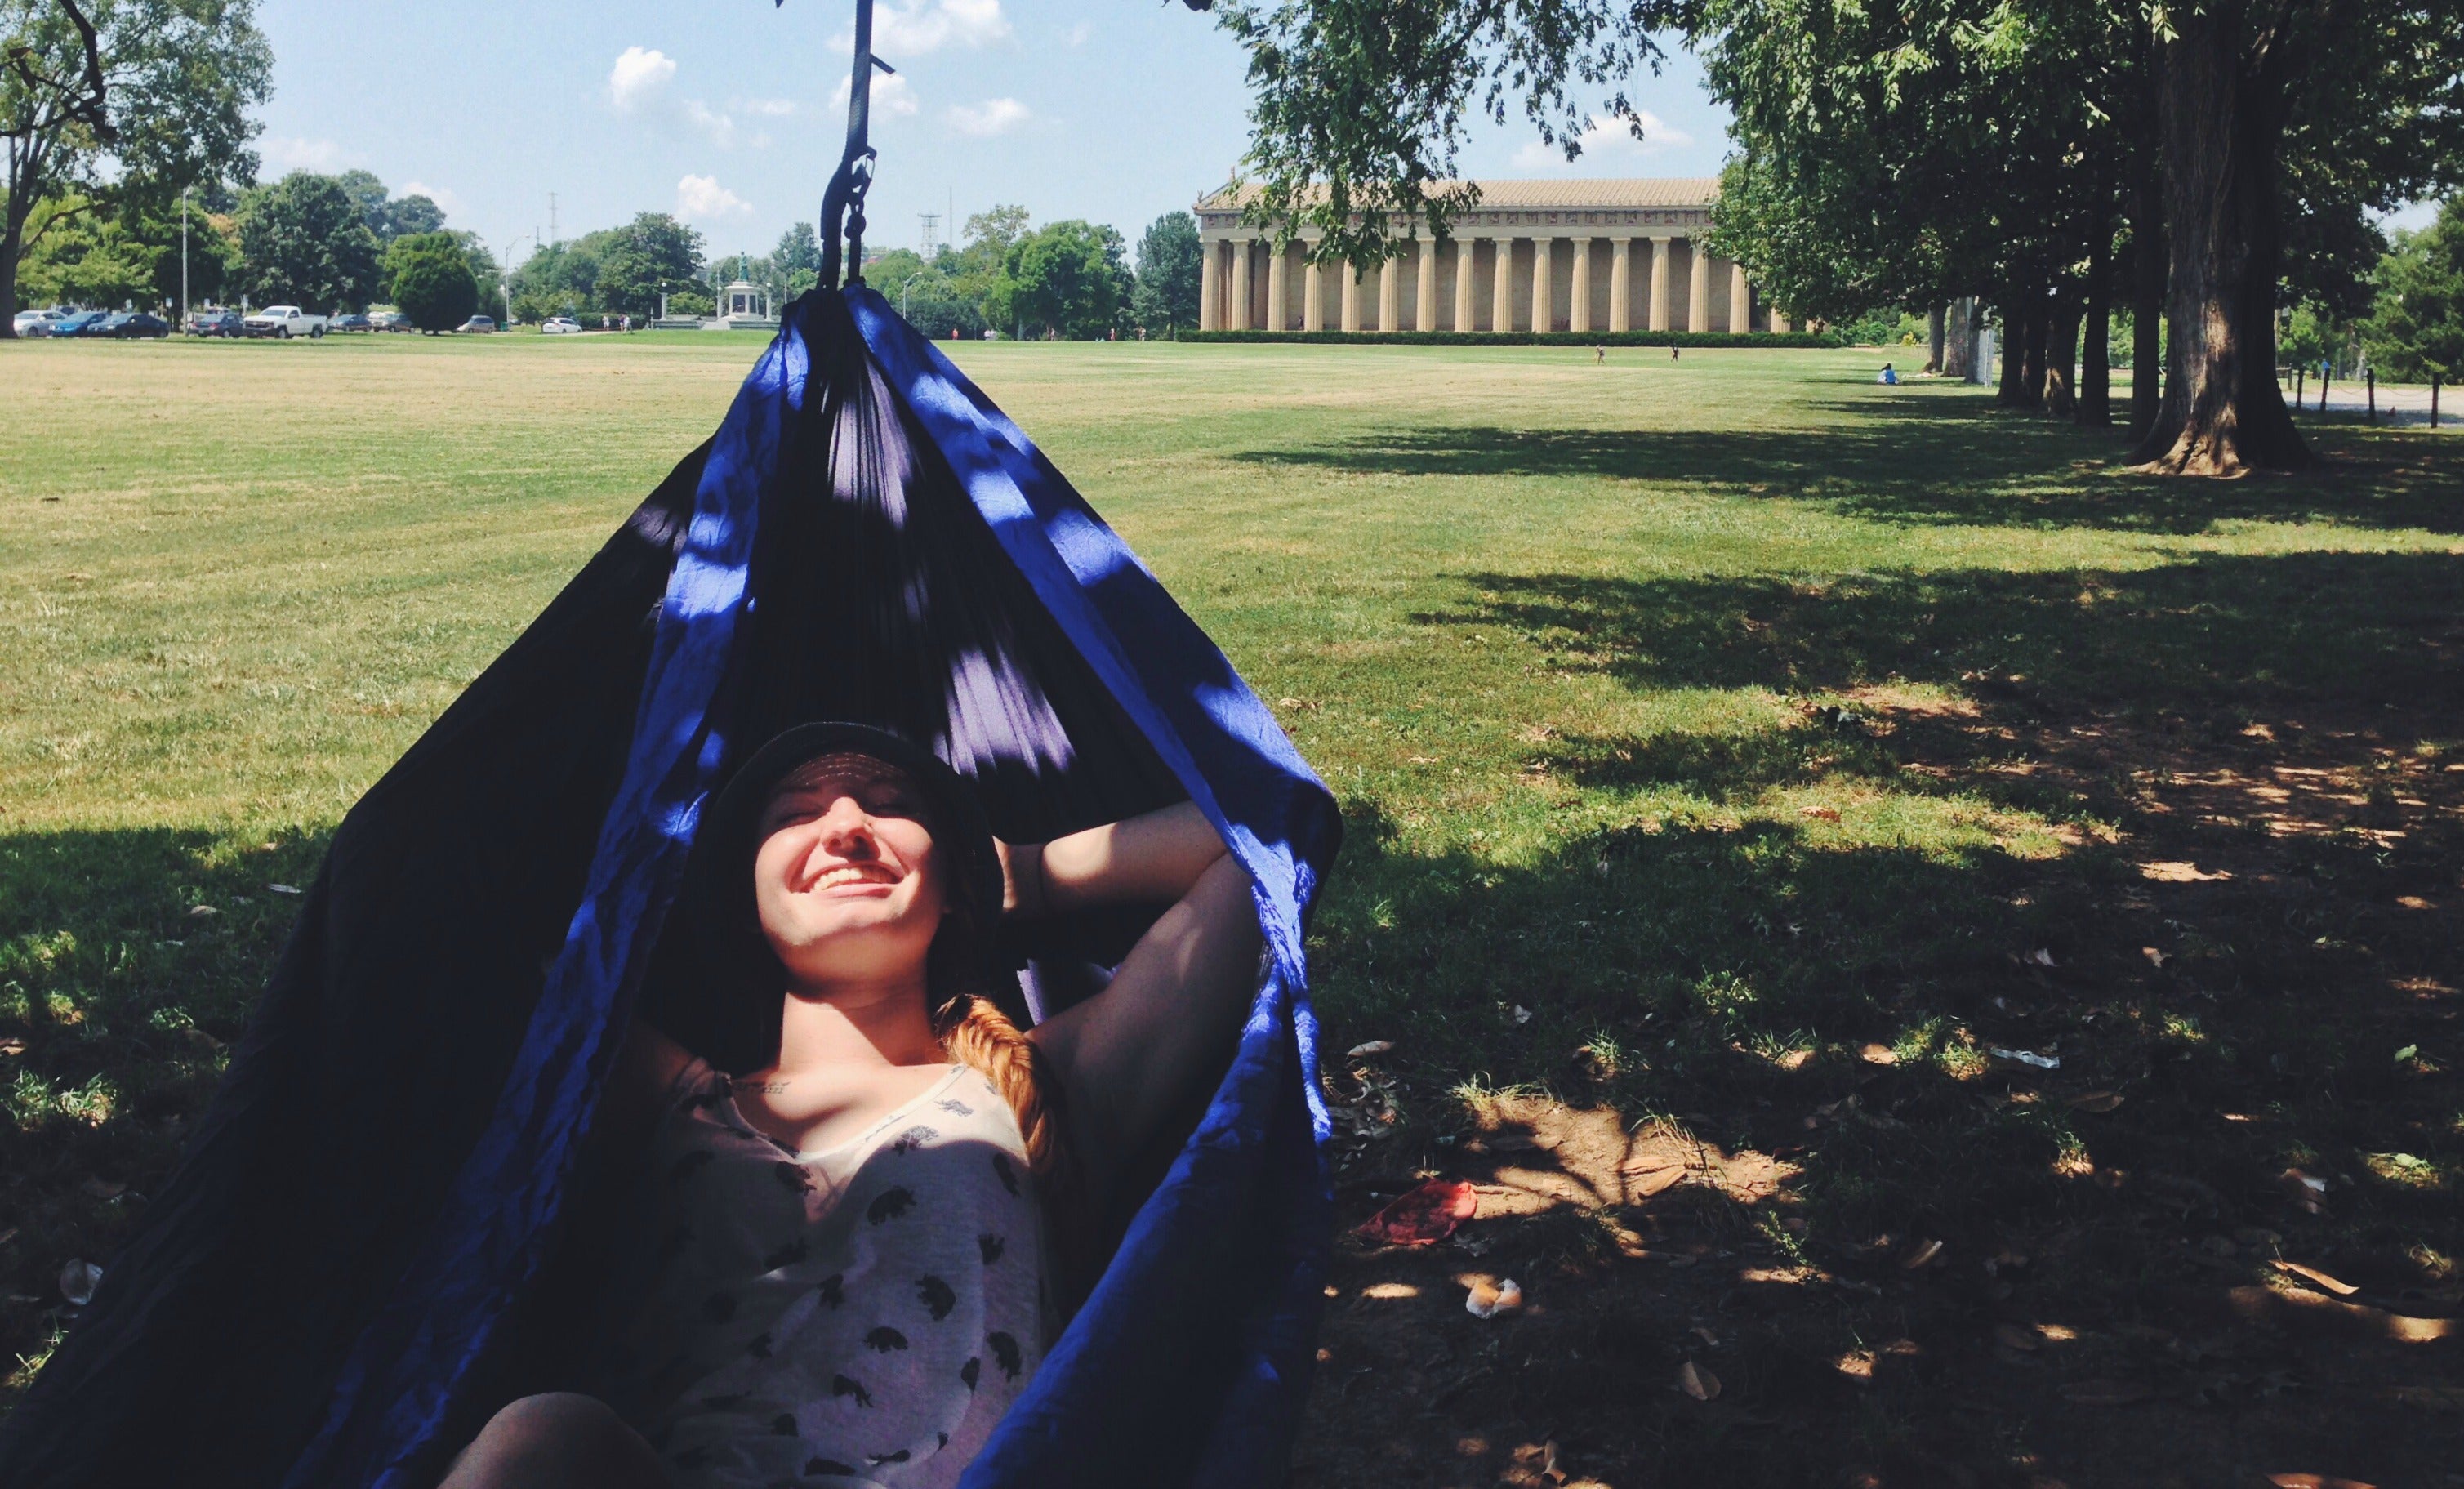 5 Reasons Hammocks Are a College Essential